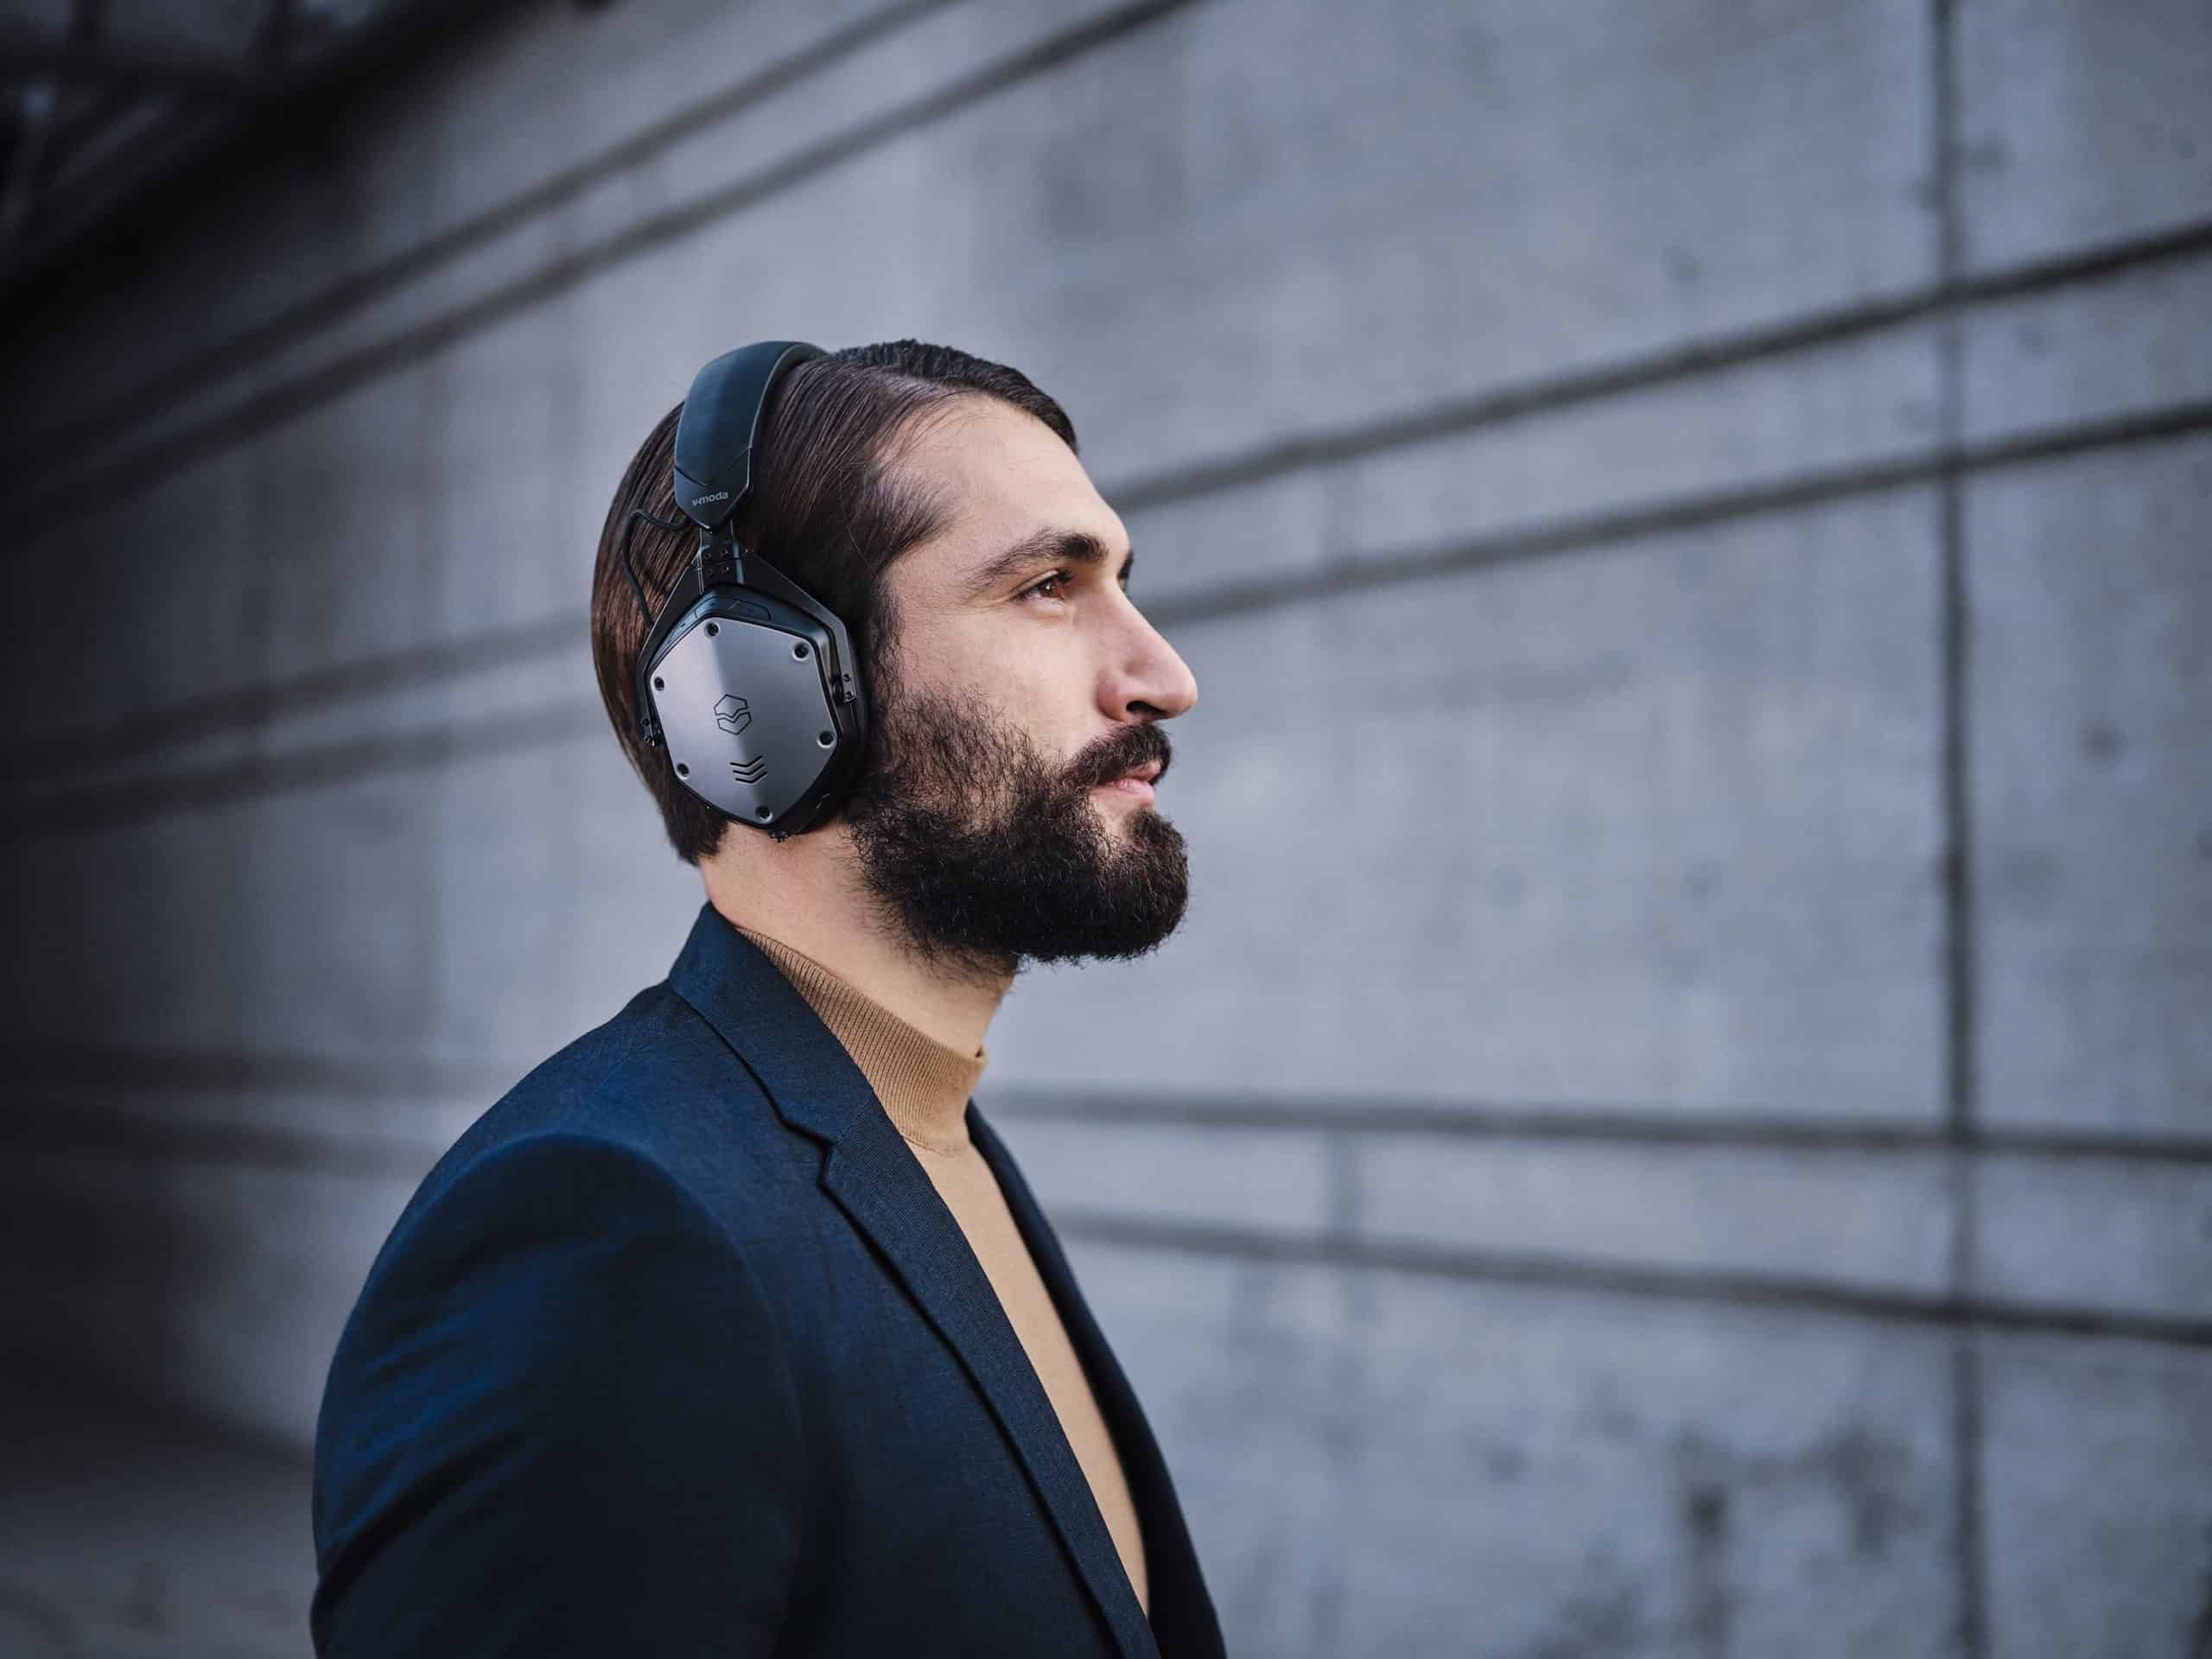 V-MODA New Headphone – M-200 ANC Combines Active Noise Cancellation with In-App Sound Control